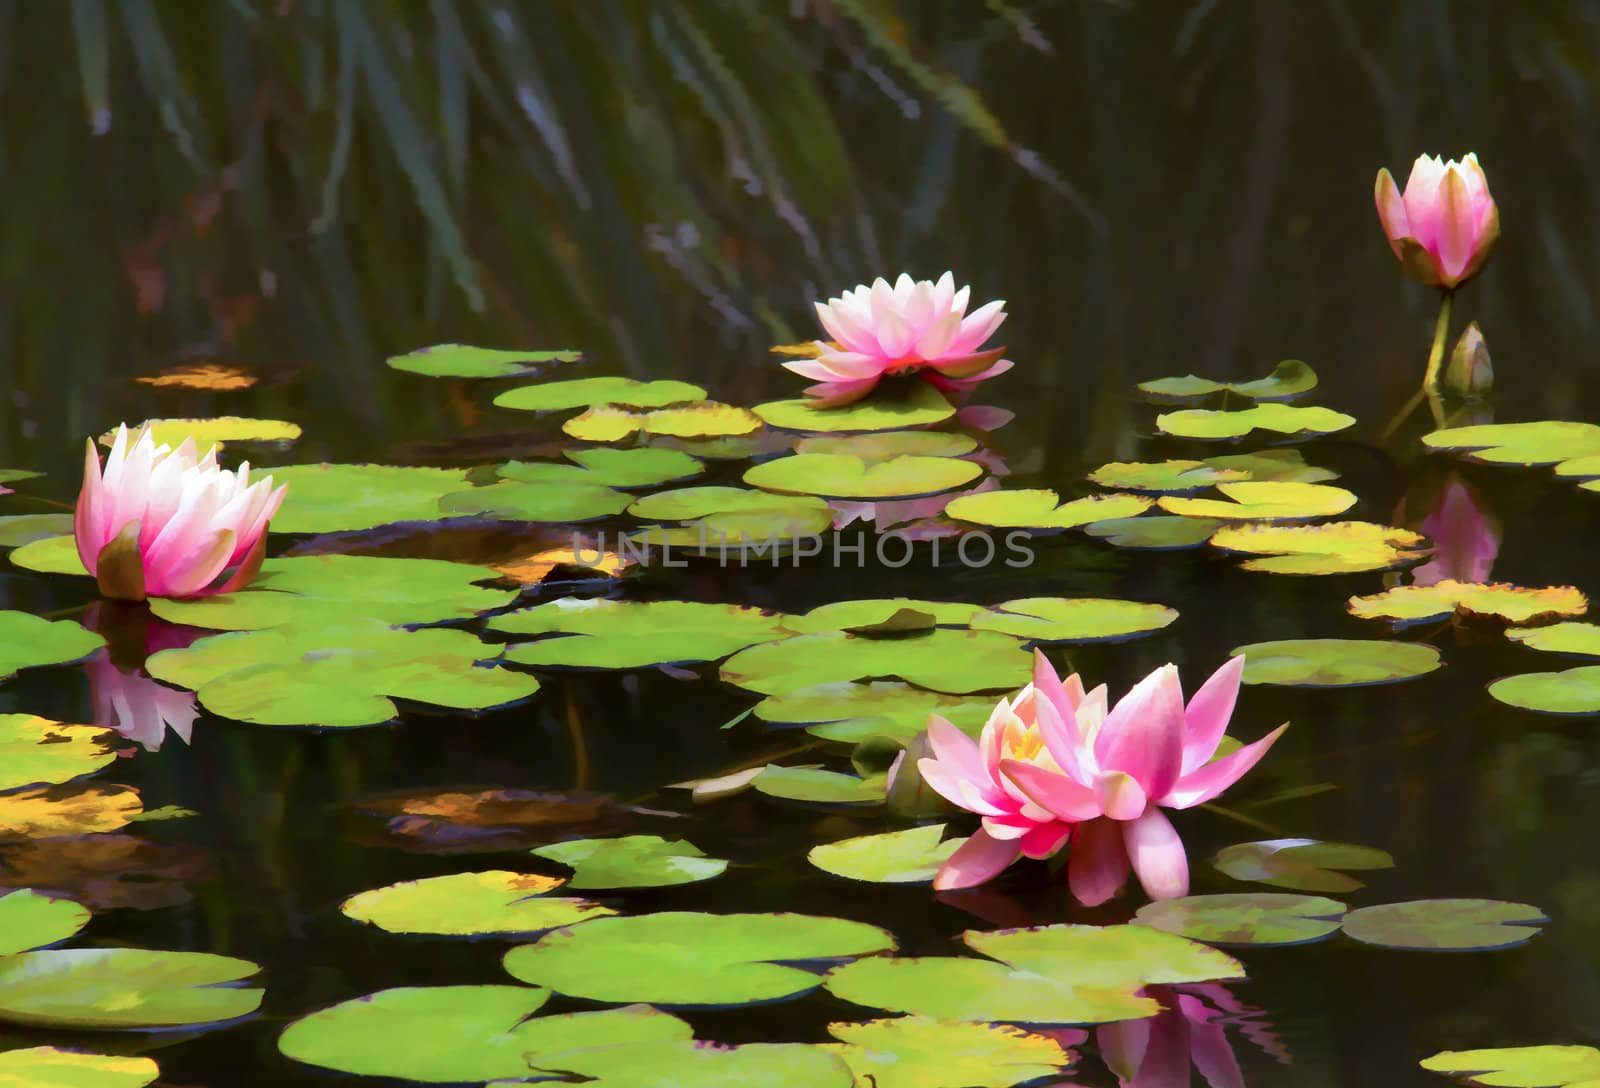 Lily Pads and Flowers by wolterk